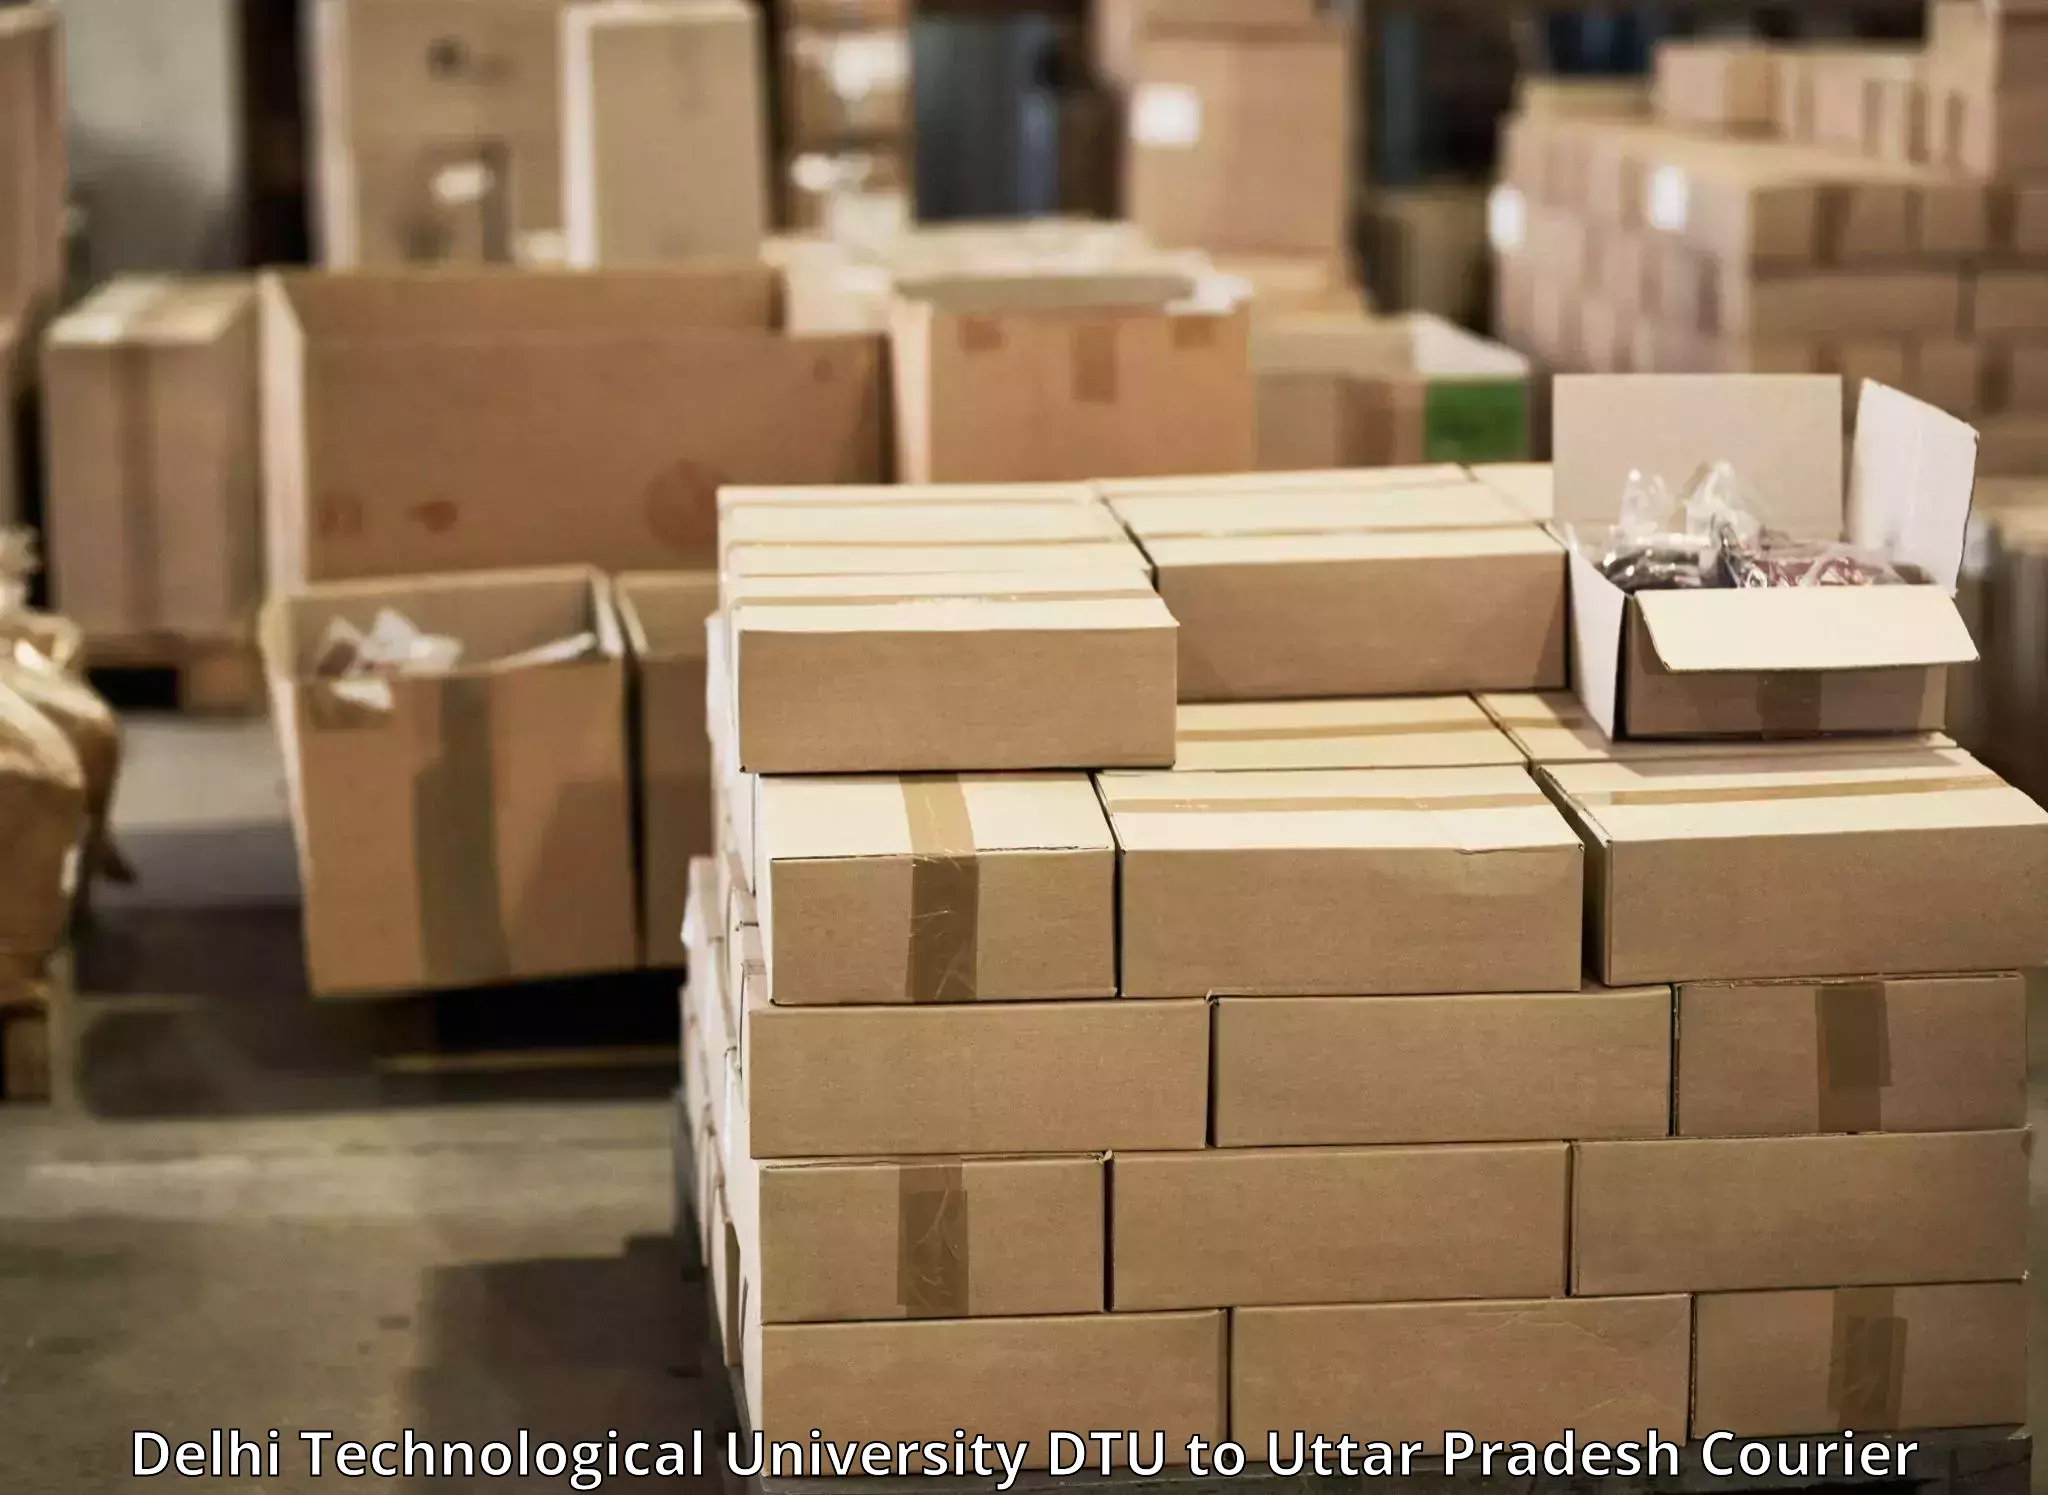 Fast shipping solutions in Delhi Technological University DTU to Shahabad